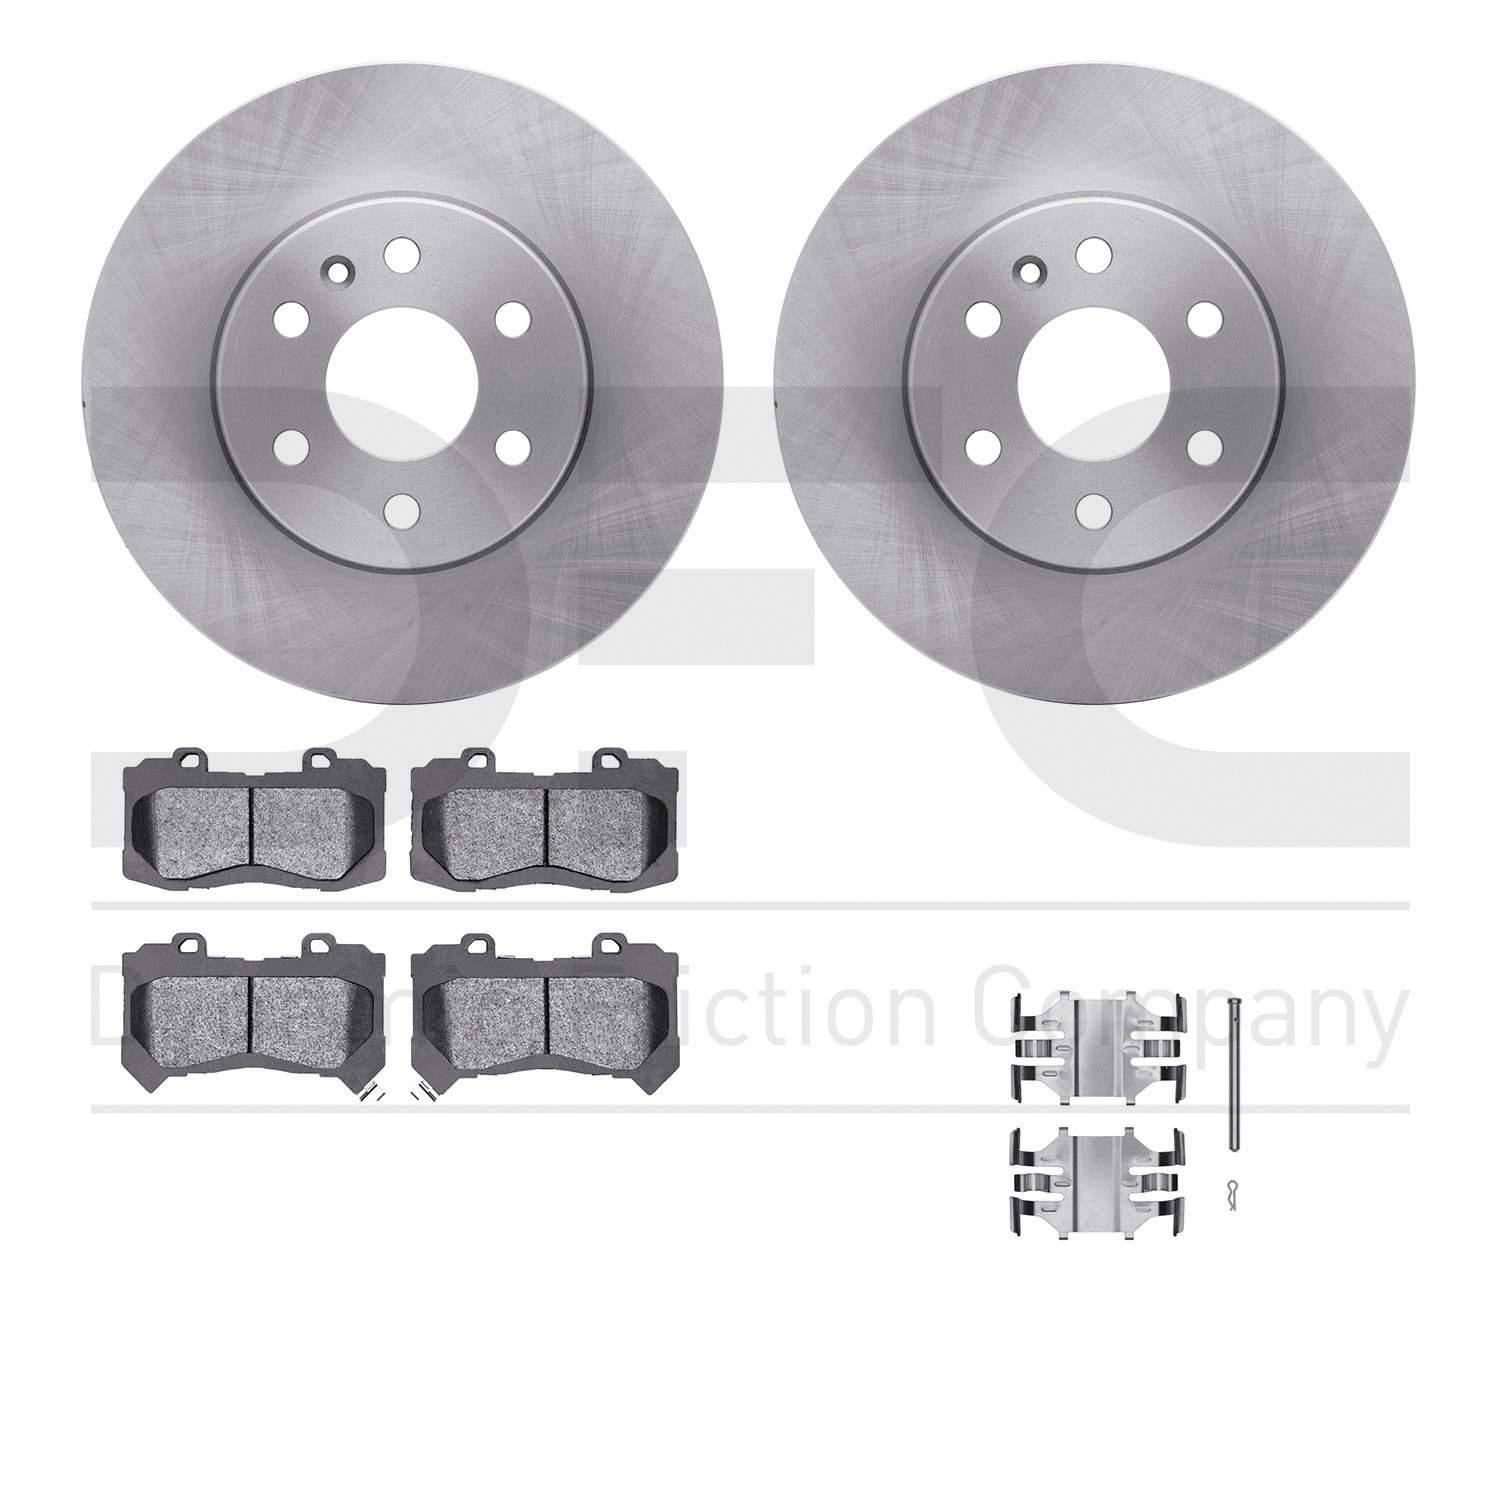 6412-48136 Brake Rotors with Ultimate-Duty Brake Pads Kit & Hardware, 2015-2020 GM, Position: Front